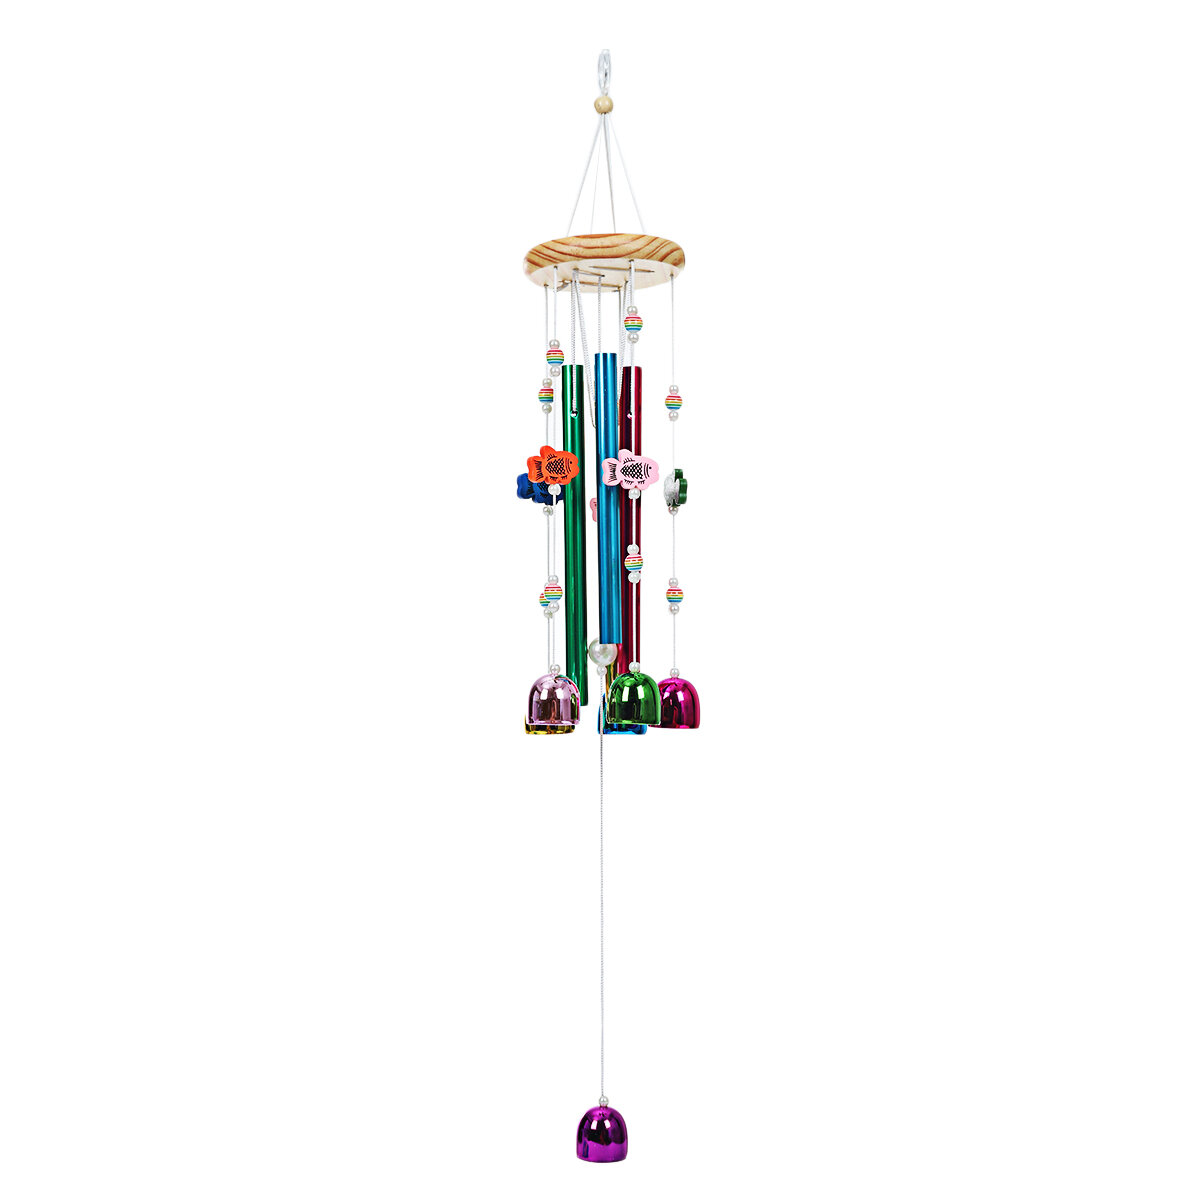 

Colorful 4 Pipes 6 Bells Wind Chime Outdoor Garden Yard Bells Hanging Charm Decor Ornament for Gifts